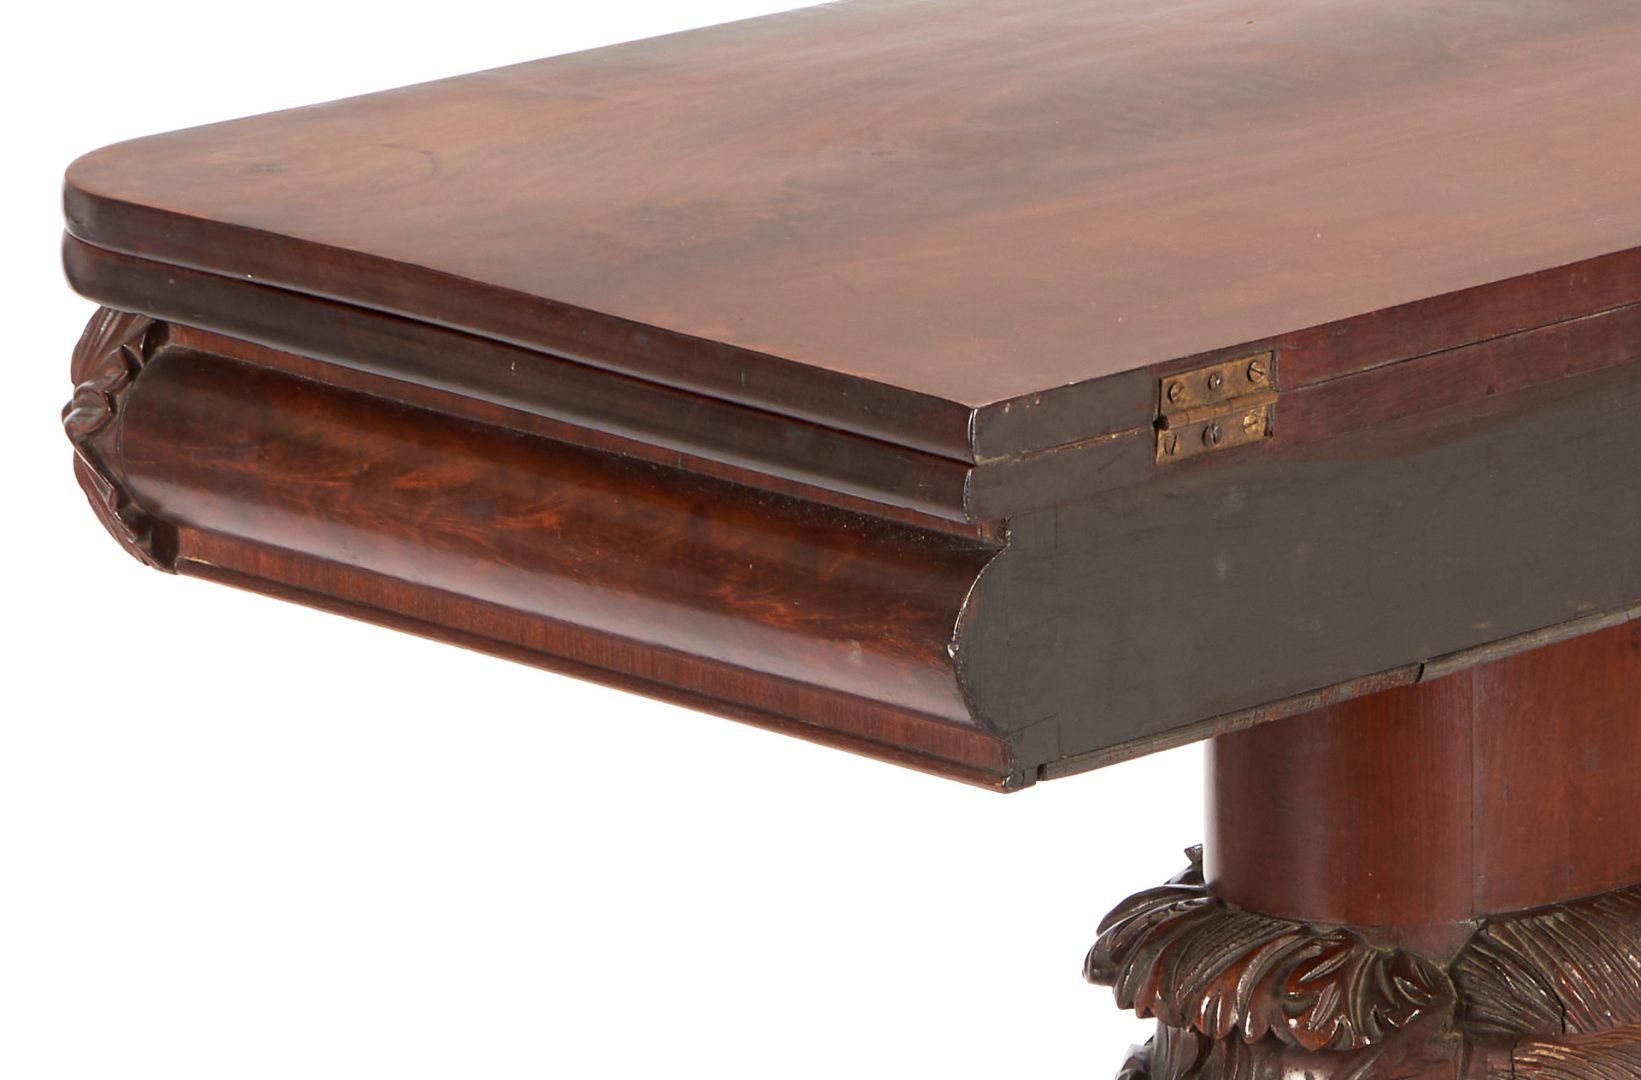 Lot 275: American Classical Carved Mahogany Card Table, Attrib. Quervelle